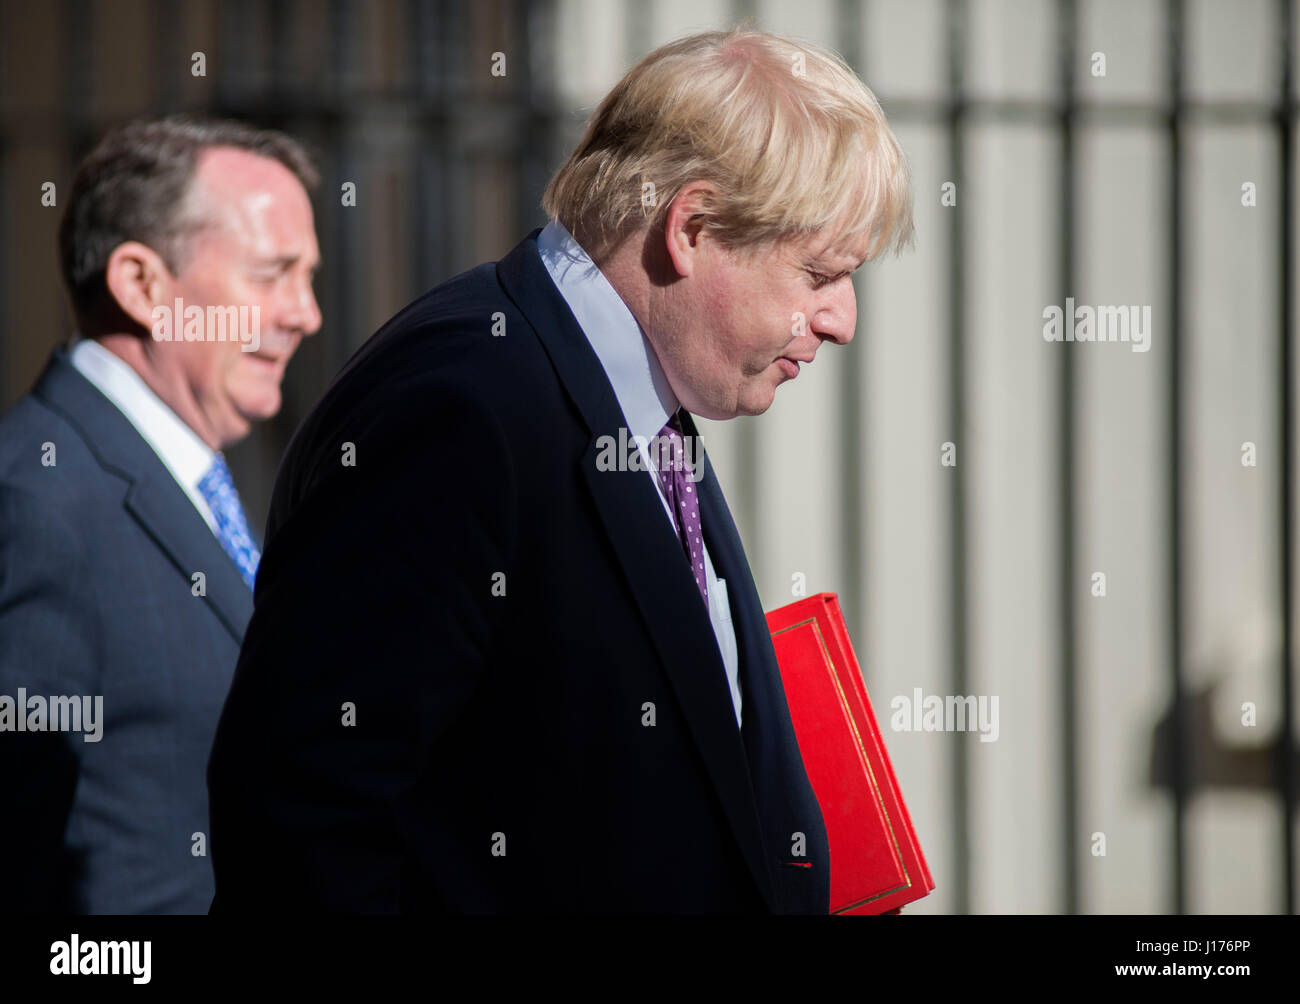 Downing Street, London UK. 18th April, 2017. Cabinet Ministers arrive for the first Tuesday morning cabinet meeting after Easter break before PM Theresa May announces a snap election for 8th June 2017. Photo: Foreign Secretary Boris Johnson MP arrives with International Trade Secretary Liam Fox MP. Credit: Malcolm Park/Alamy Live News. Stock Photo